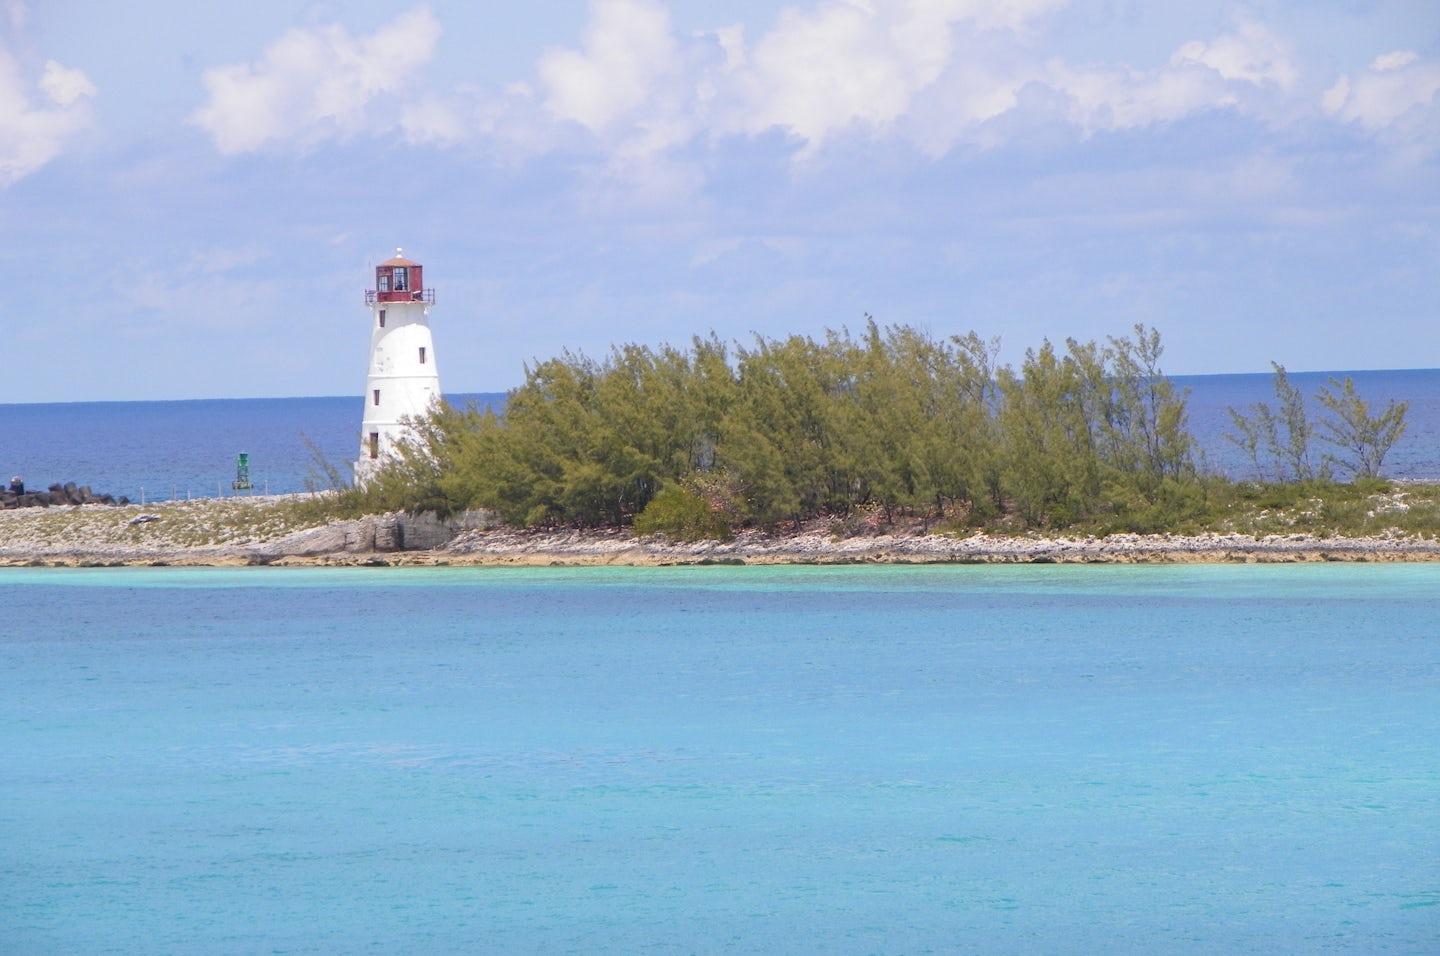 View of the lighthouse at the port in Nassau.